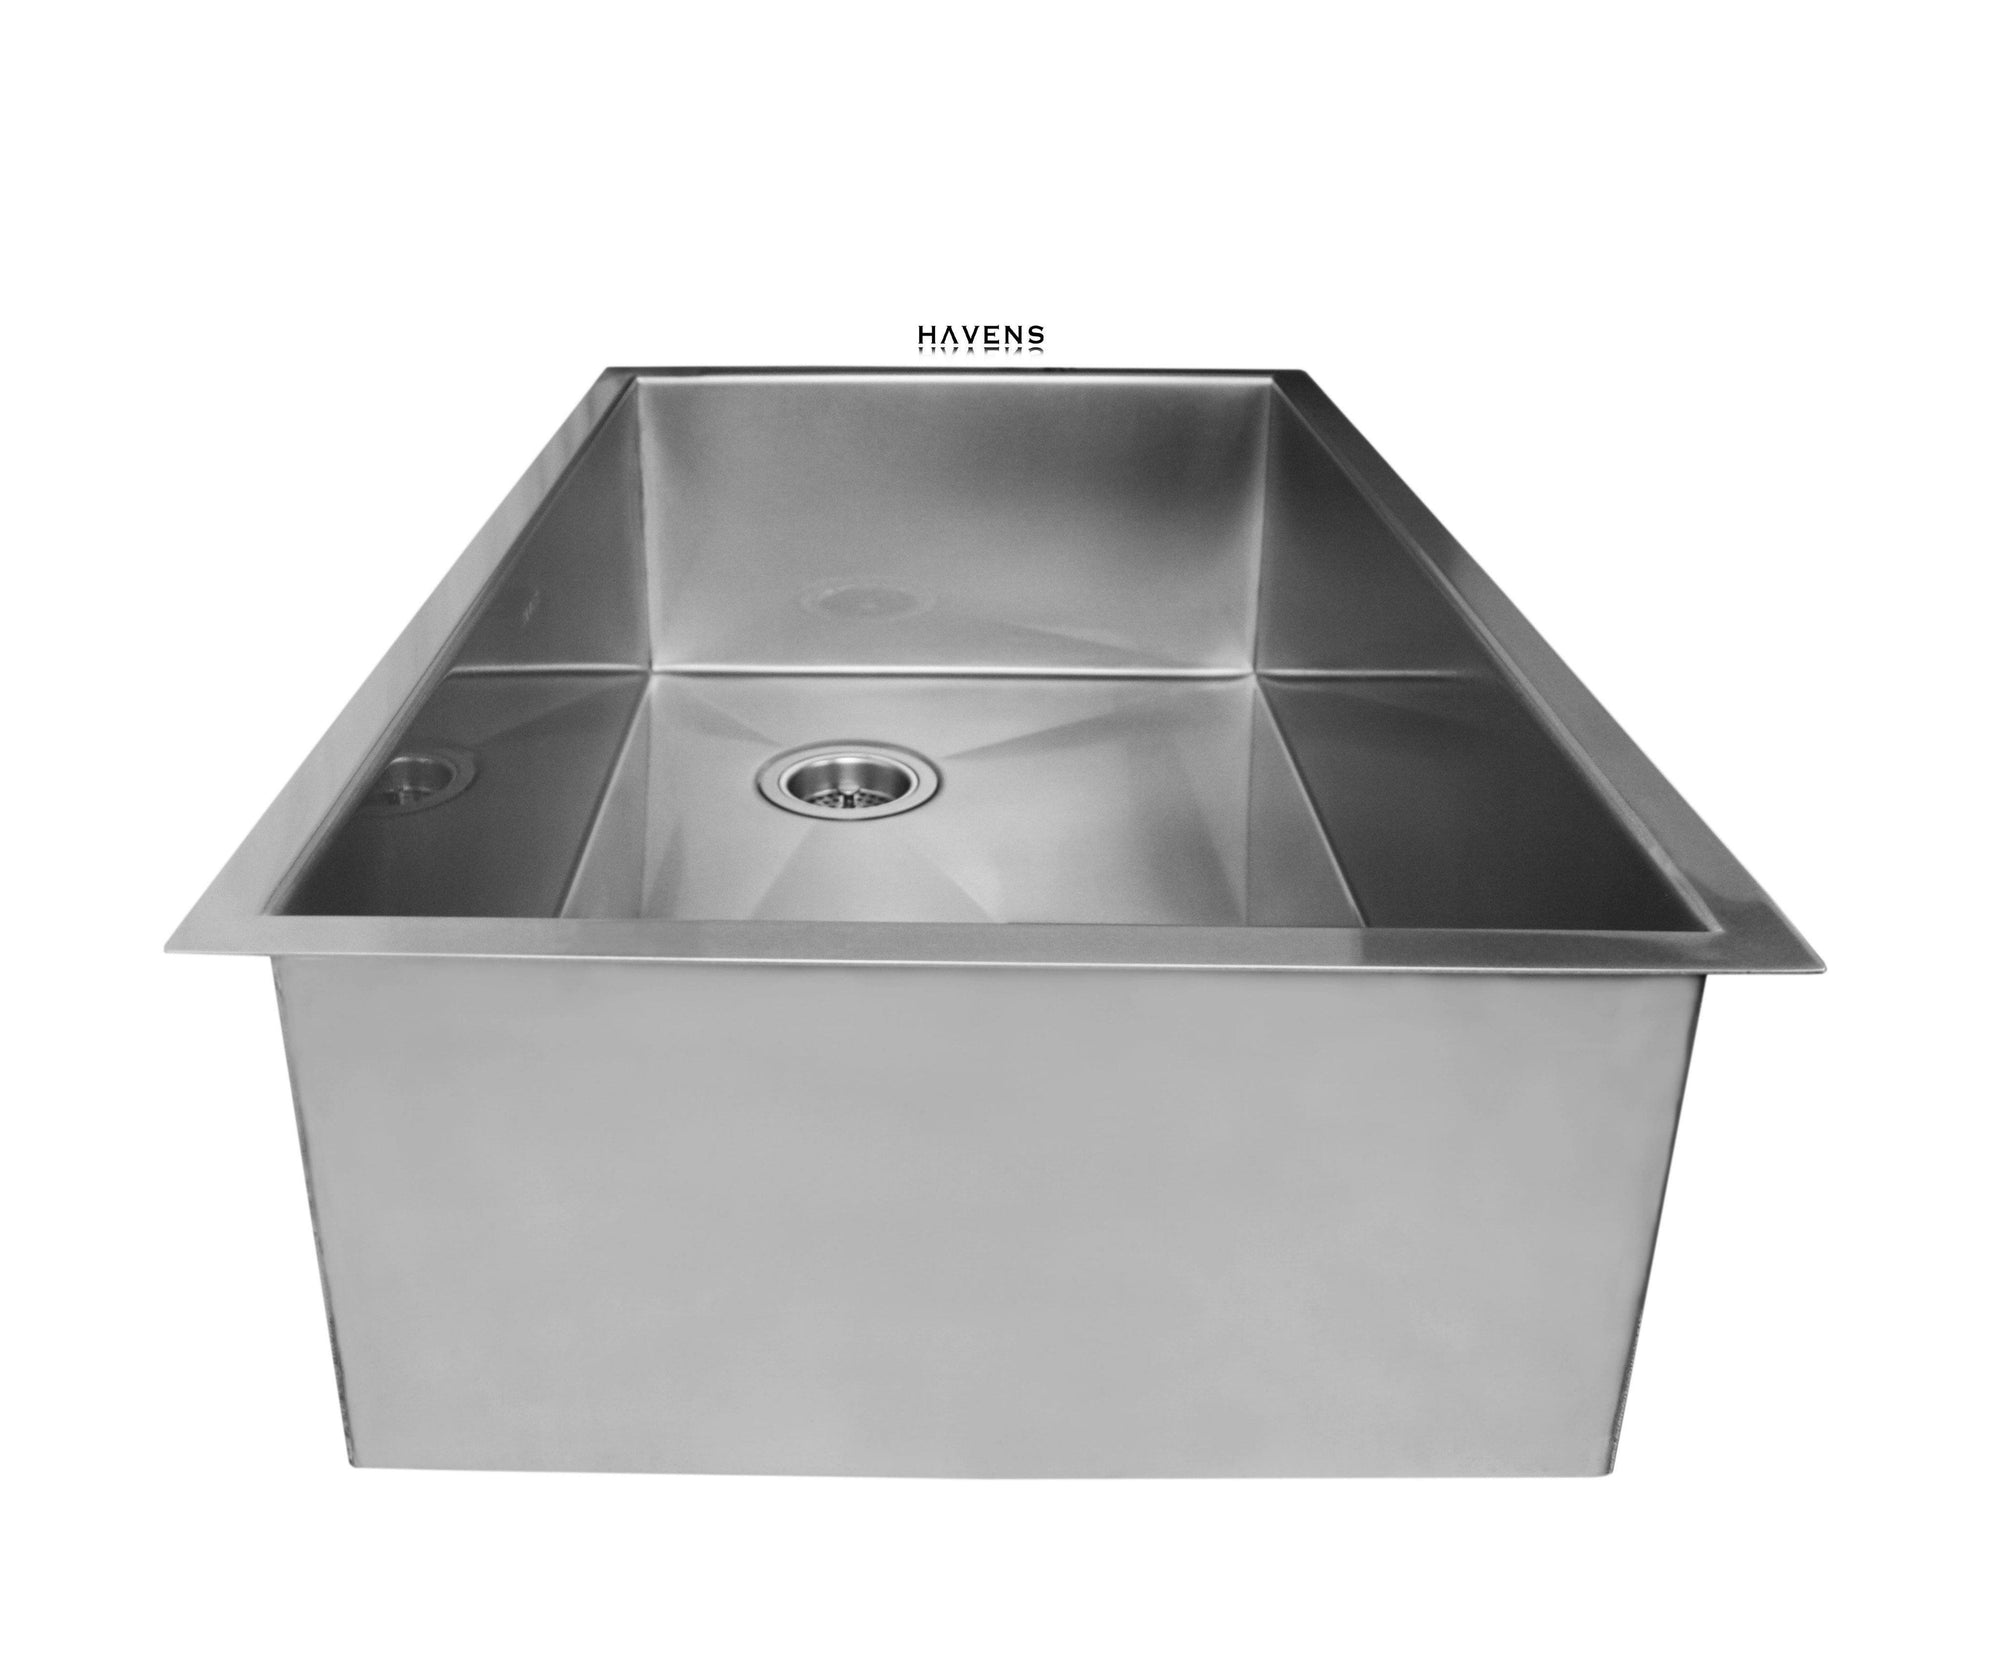 The best stainless steel sink made from 16 gauge stainless and handcrafted in the USA.